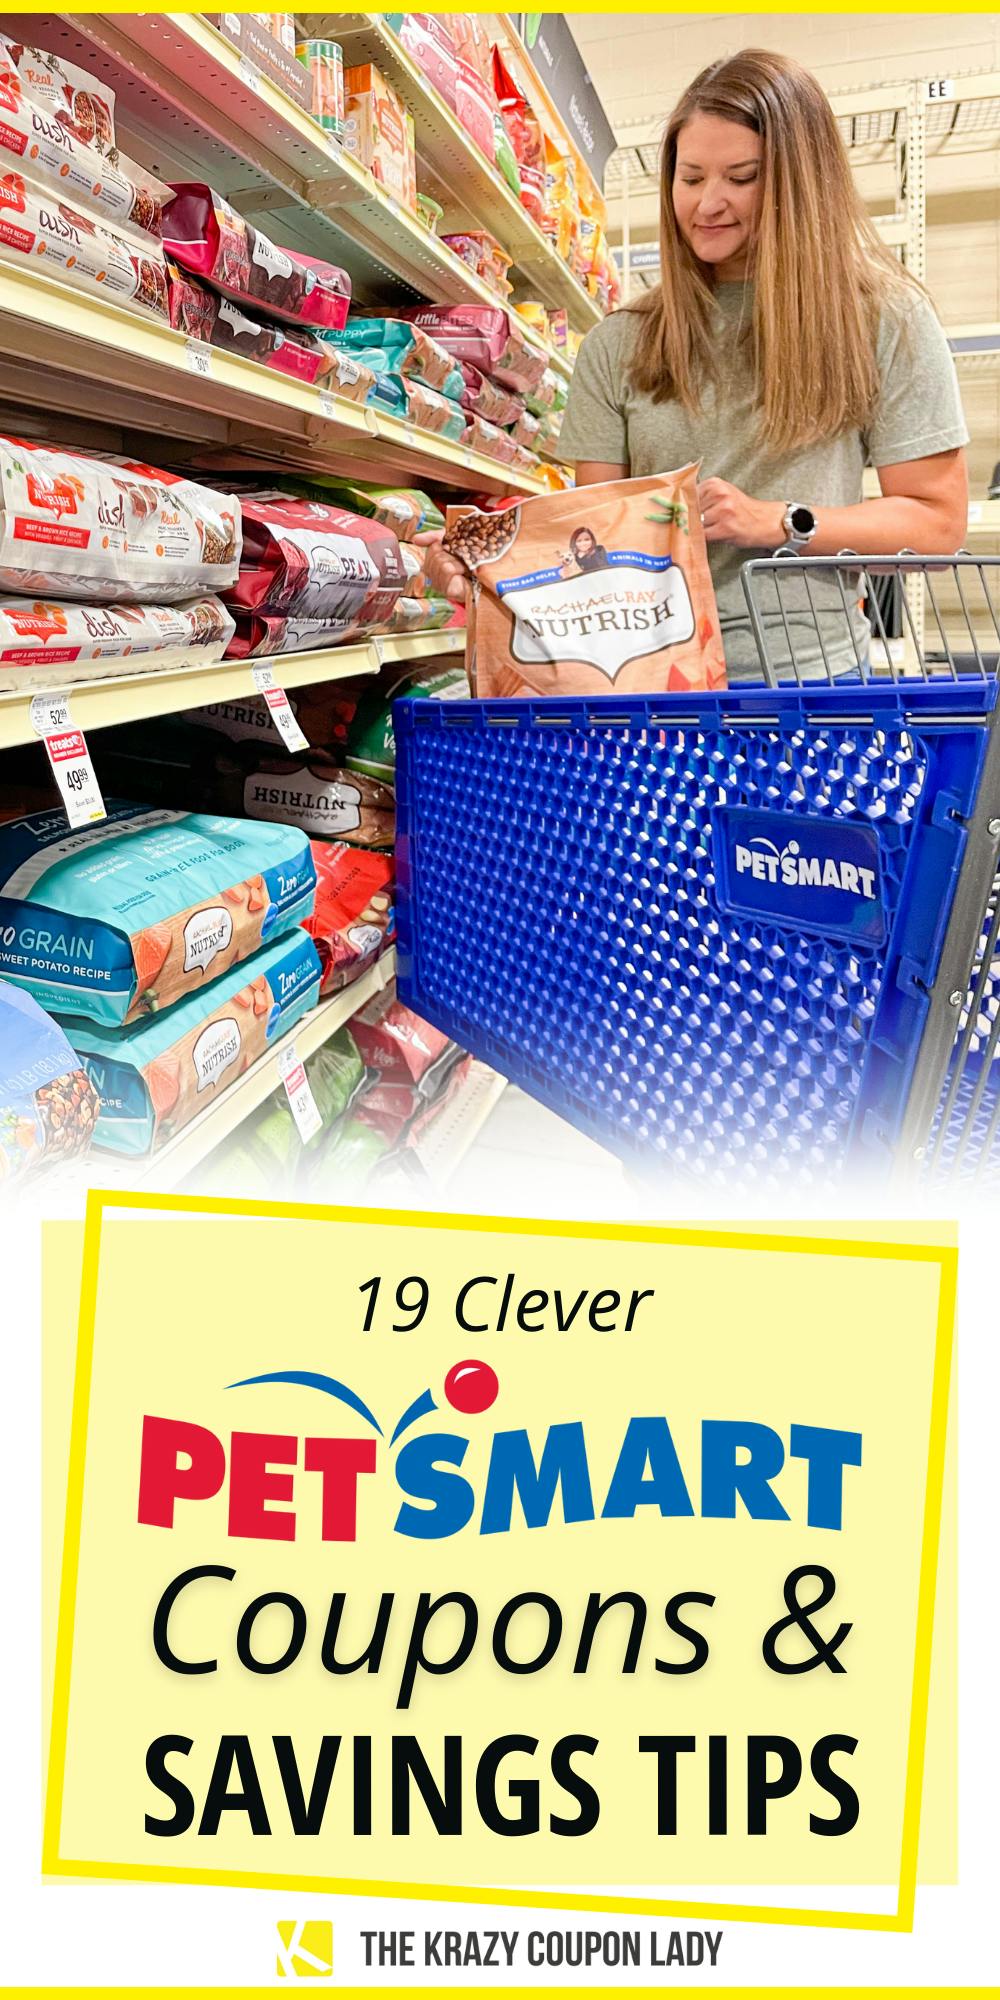 19-petsmart-coupons-savings-tips-to-get-all-the-treats-the-krazy-coupon-lady